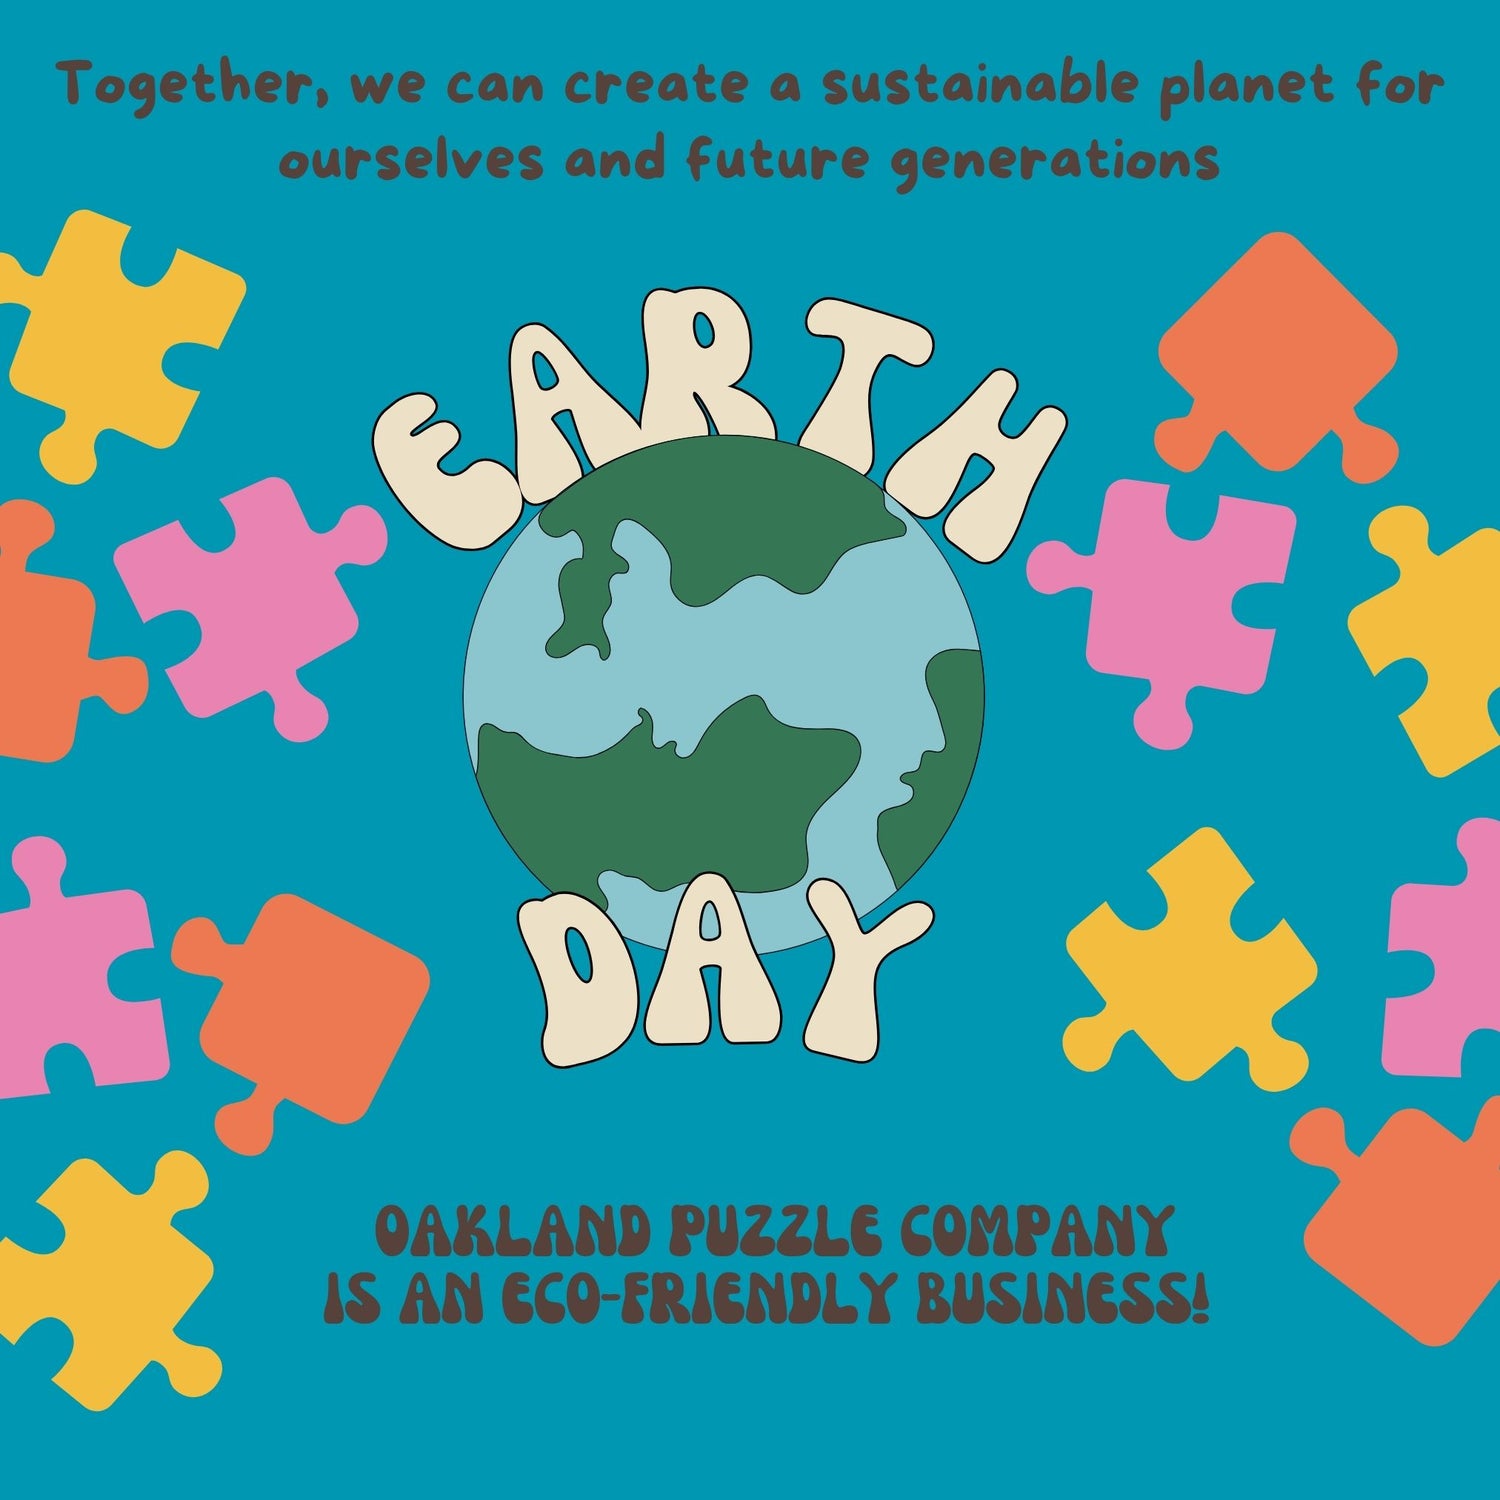 An image that has the words Earth Day wrapped around the planet surrounded by jigsaw puzzle pieces. With the words "Together, we can create a sustainable planet for ourselves and future generations Oakland Puzzle Company is an eco-friendly business!"